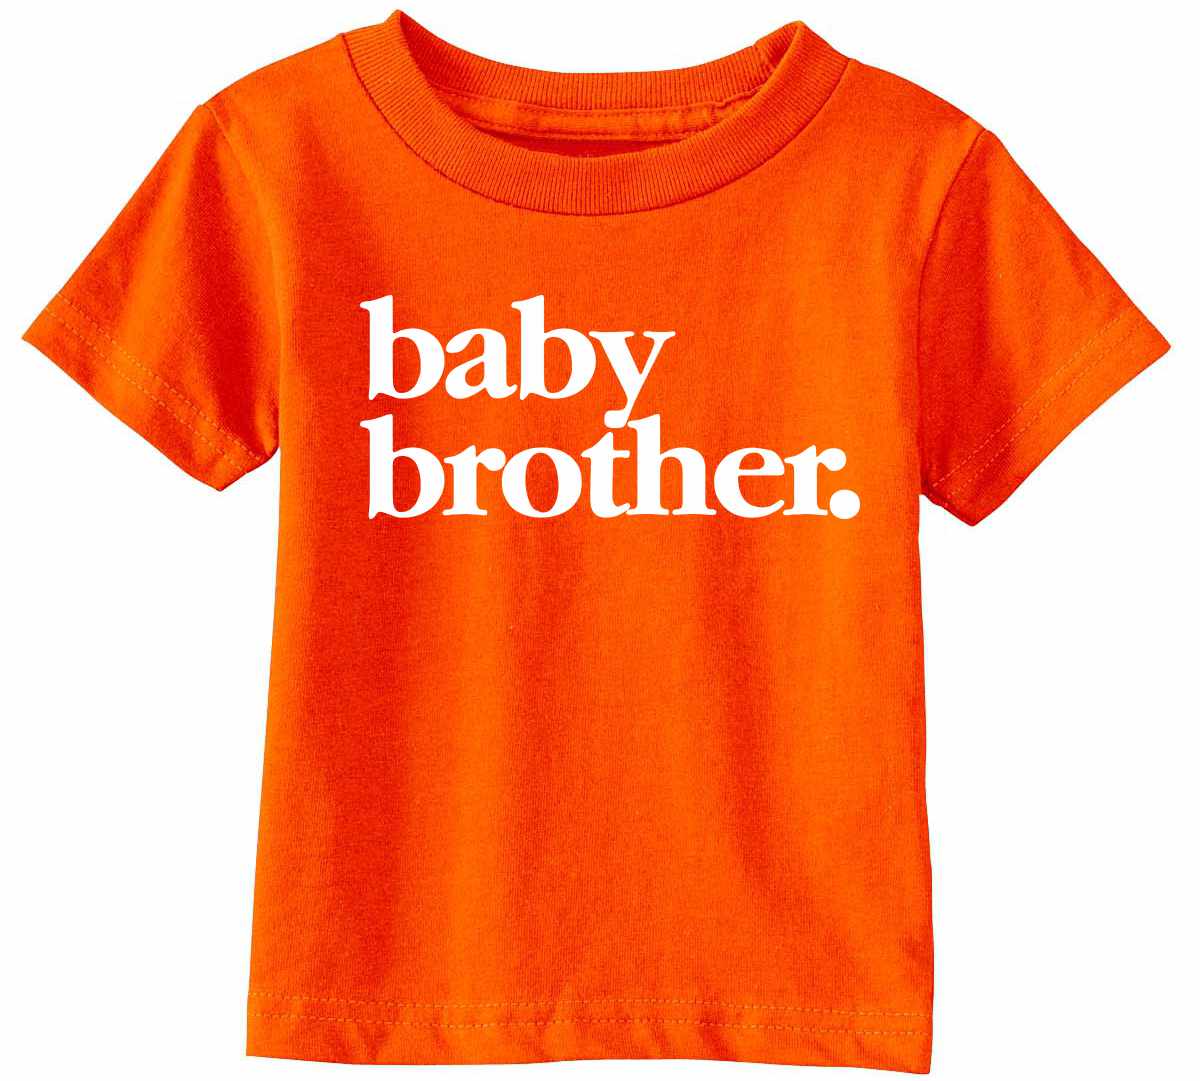 Baby Brother on Infant-Toddler T-Shirt (#1381-7)